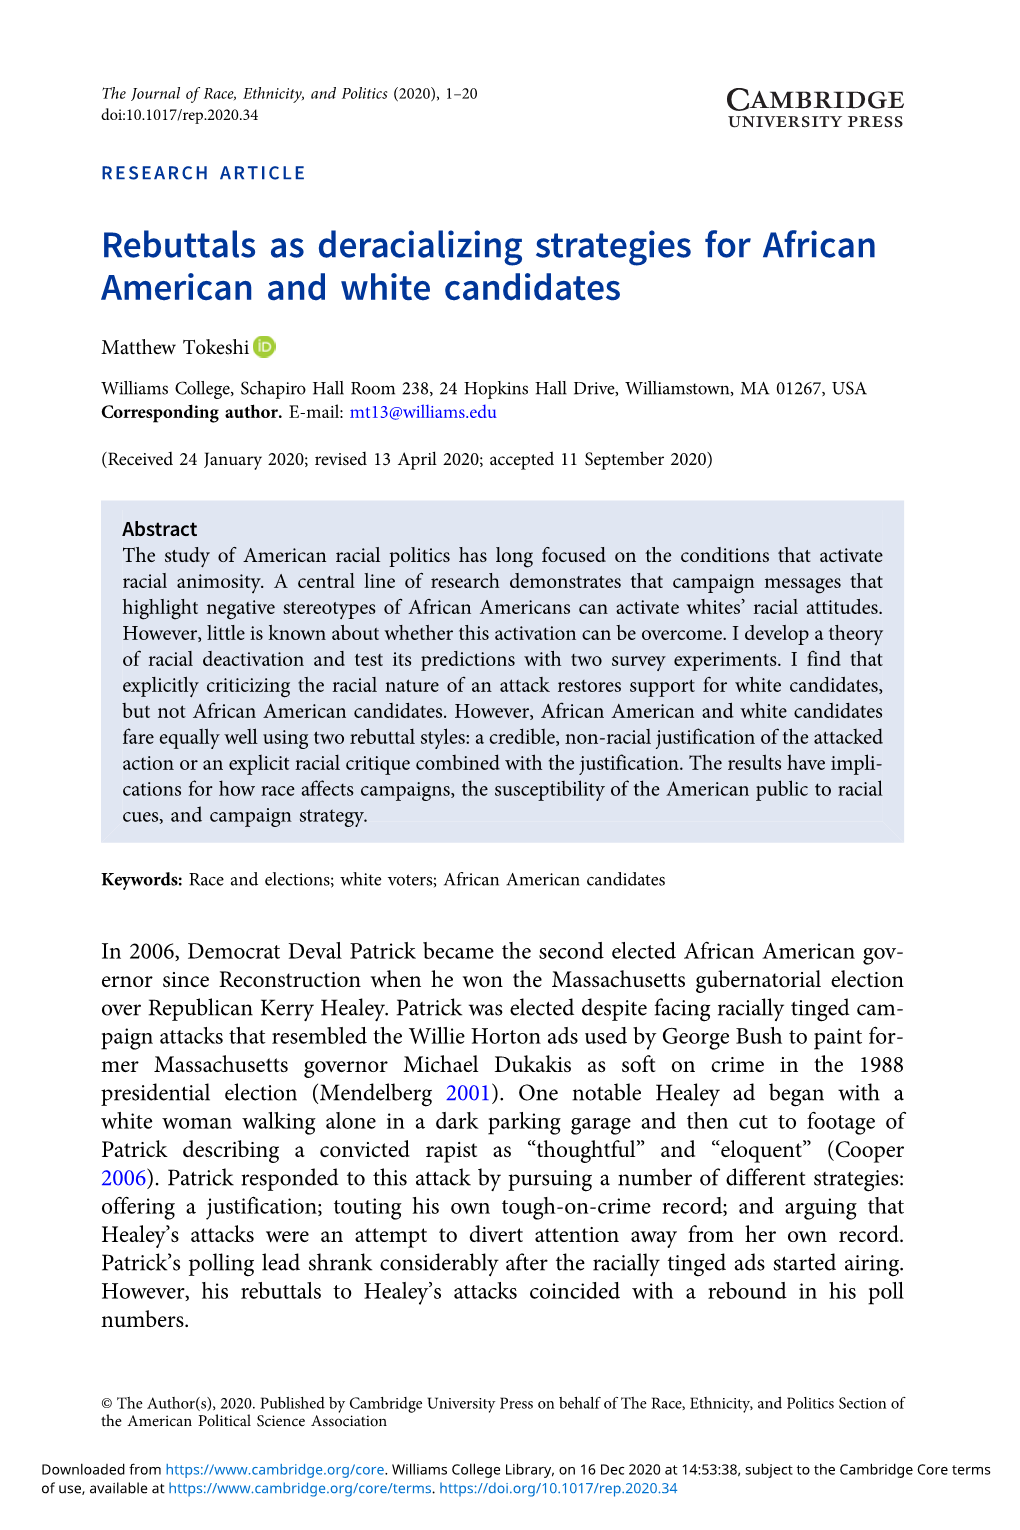 Rebuttals As Deracializing Strategies for African American and White Candidates